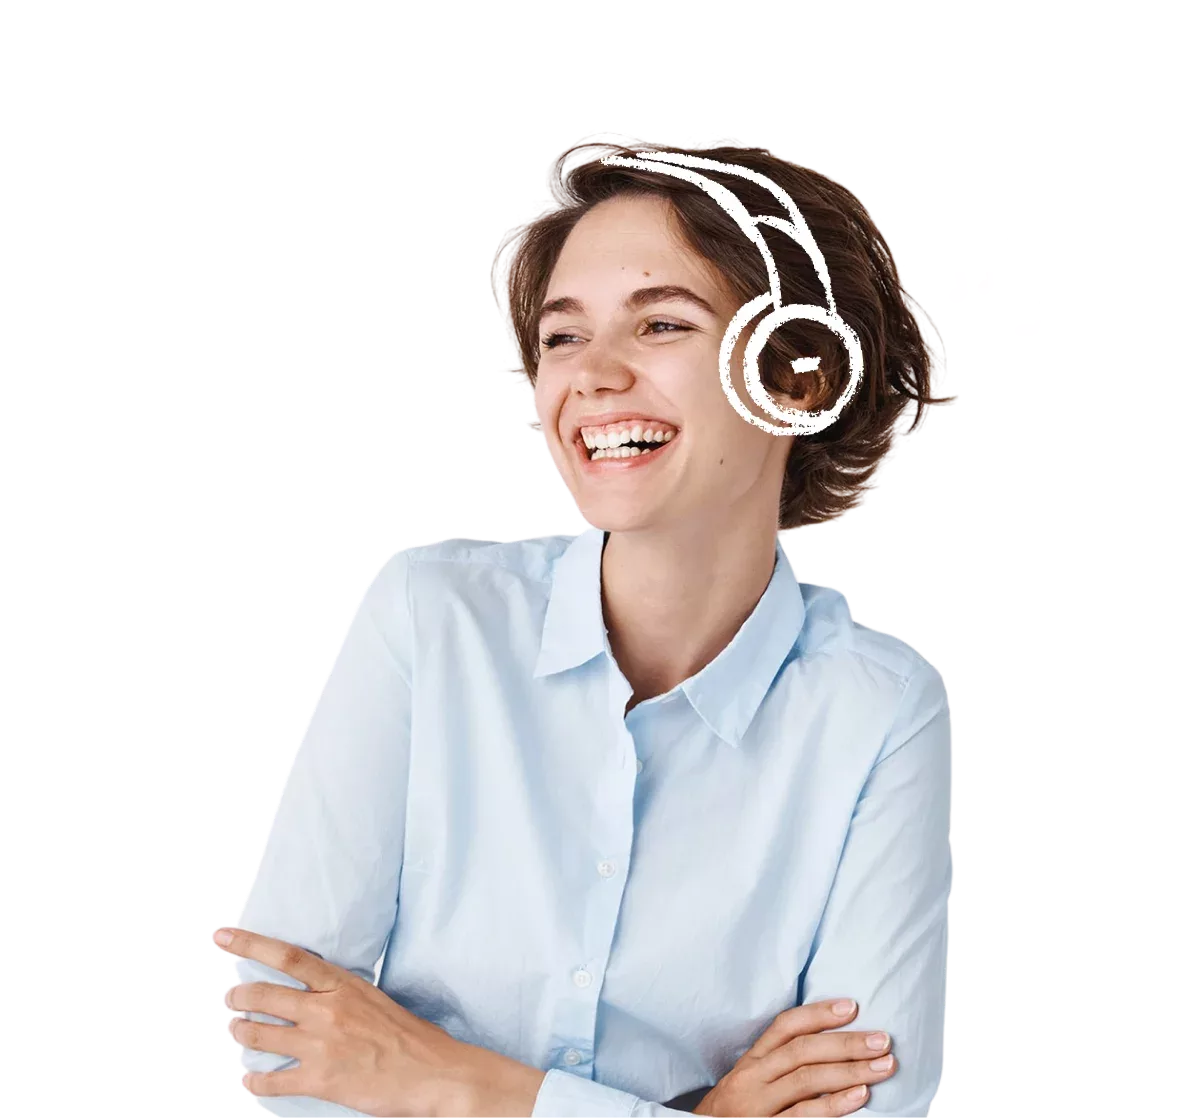 Smiling woman with playful imagery